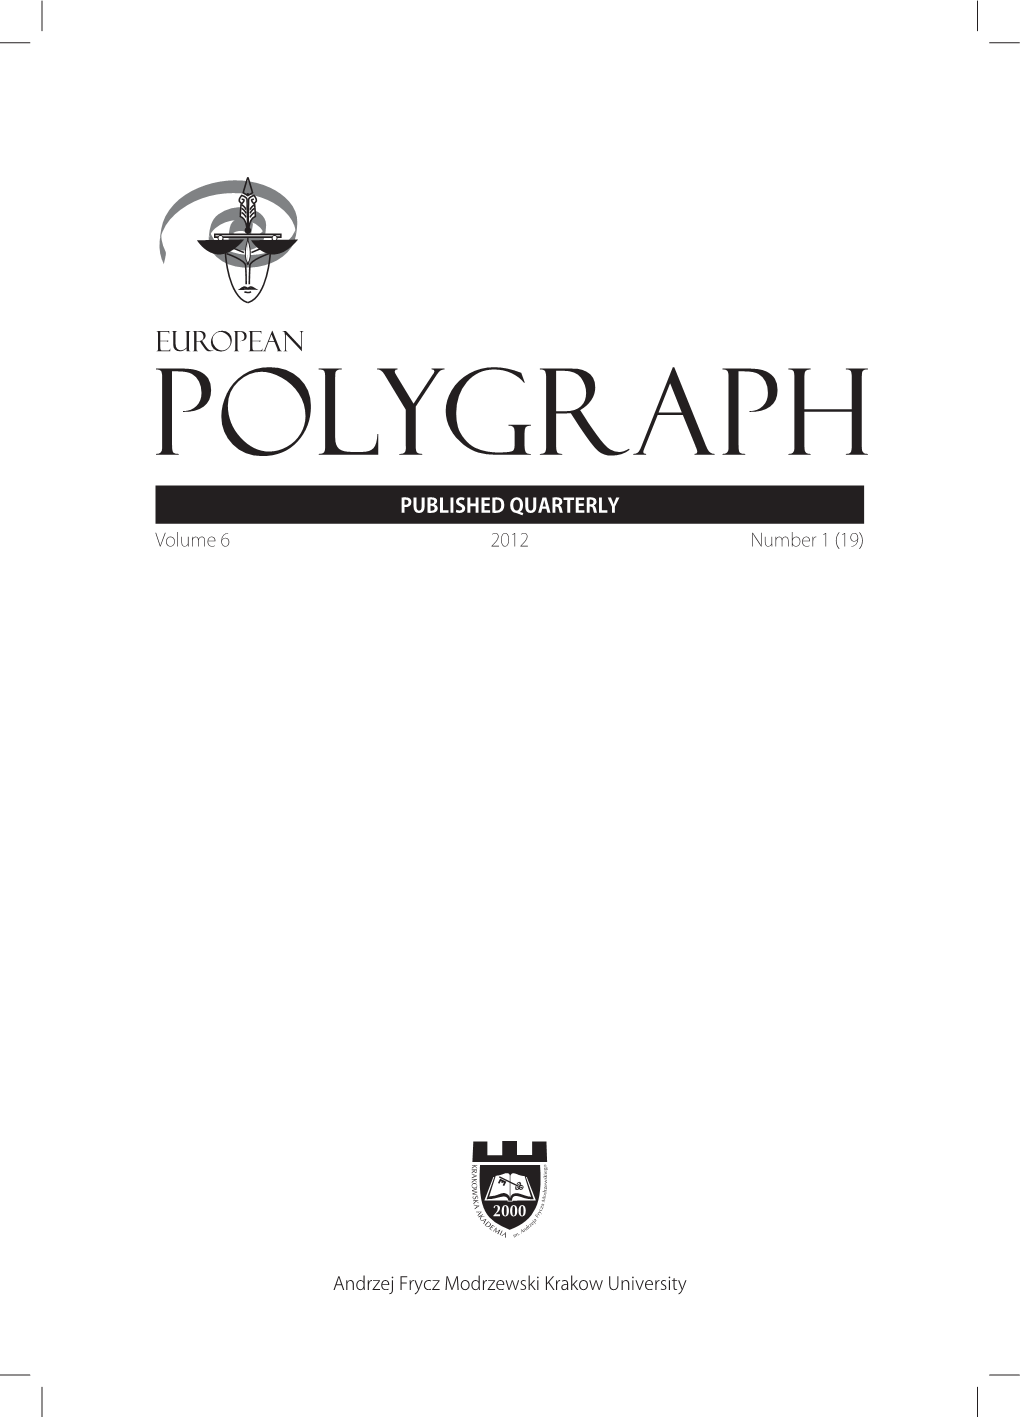 Meta-Analytic Survey of Criterion Accuracy of Validated Polygraph Techniques. Report Prepared for the American Polygraph Association Board of Directors, “Polygraph” Special Edition, 2011, vol. 40, no. 4